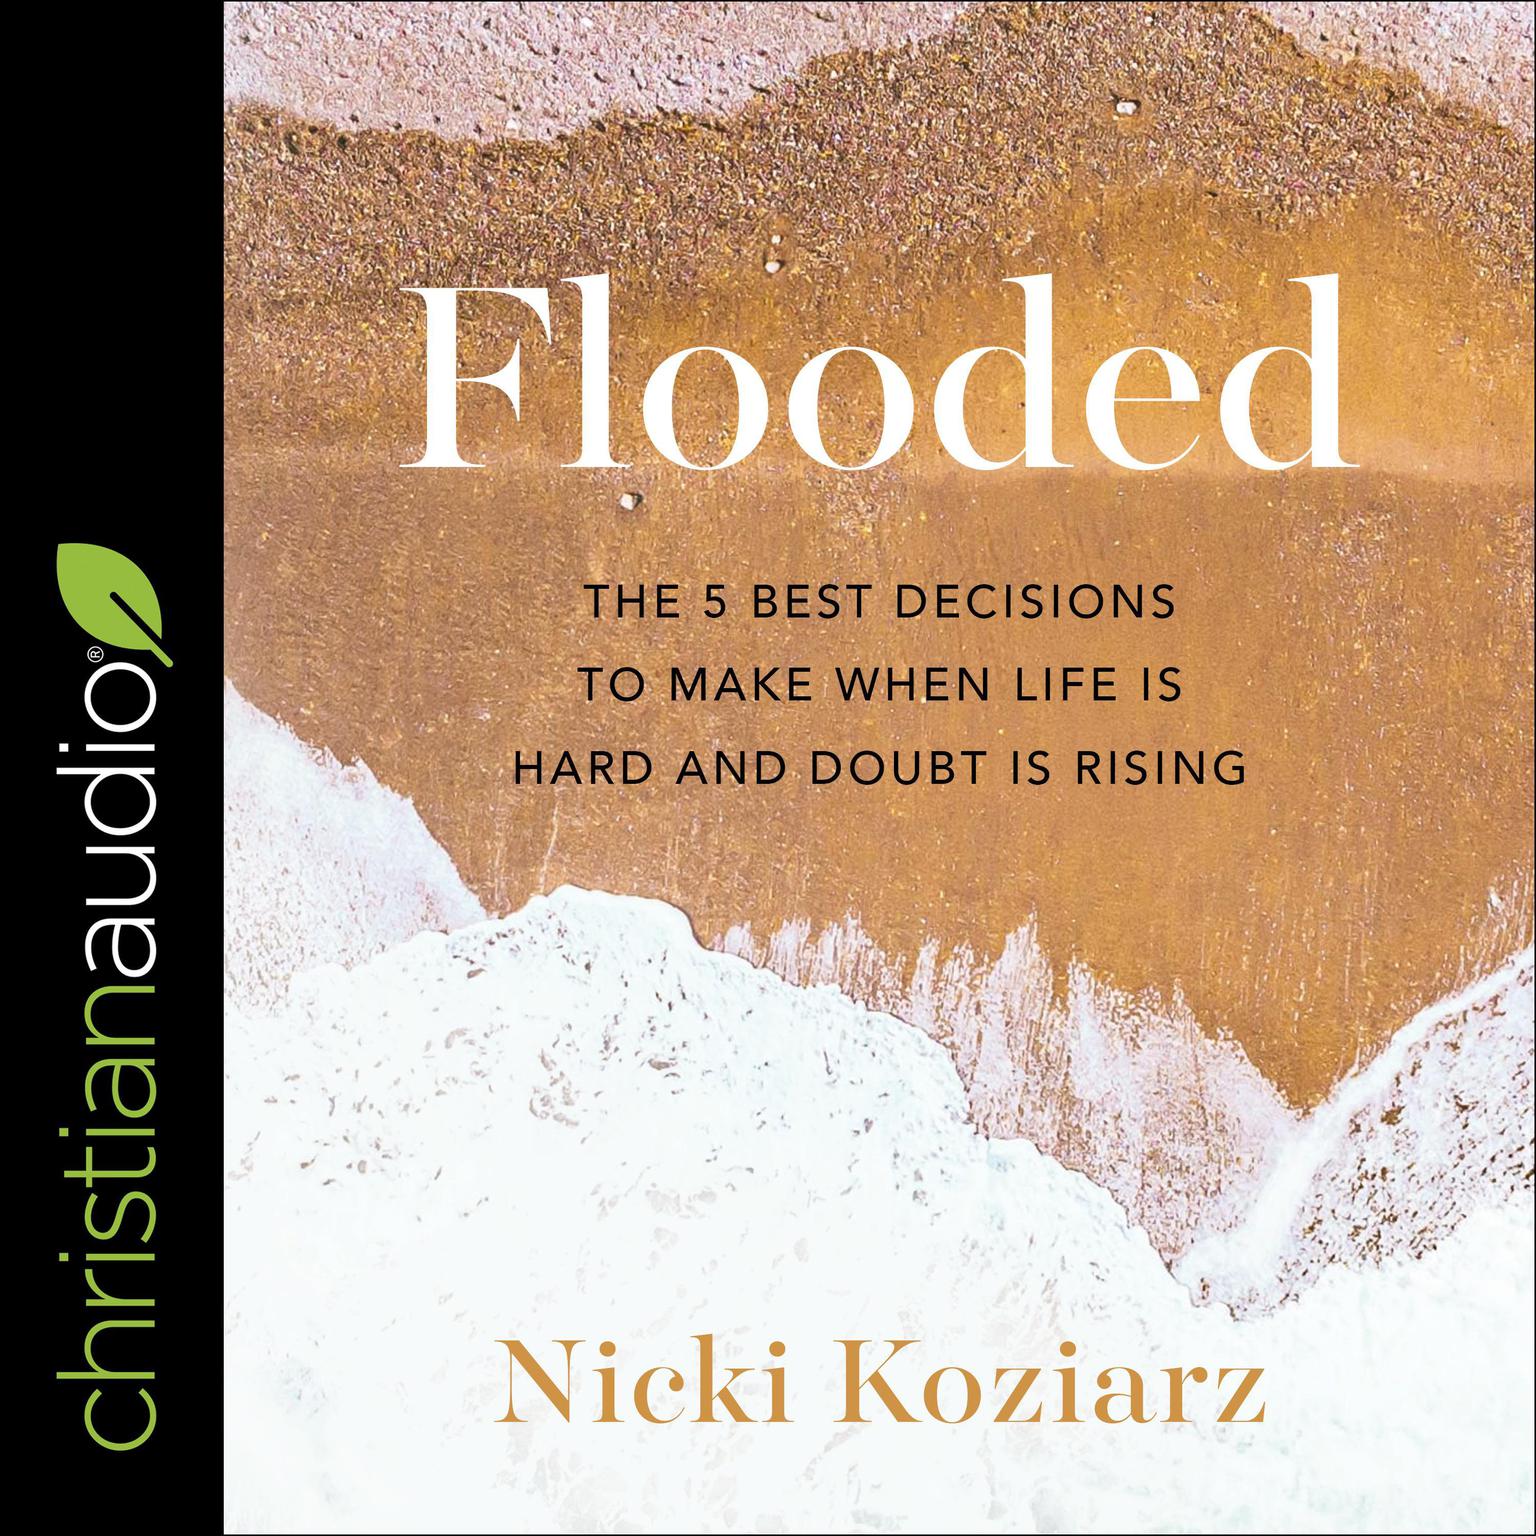 Flooded: The 5 Best Decisions to Make When Life is Hard and Doubt is Rising Audiobook, by Nicki Koziarz